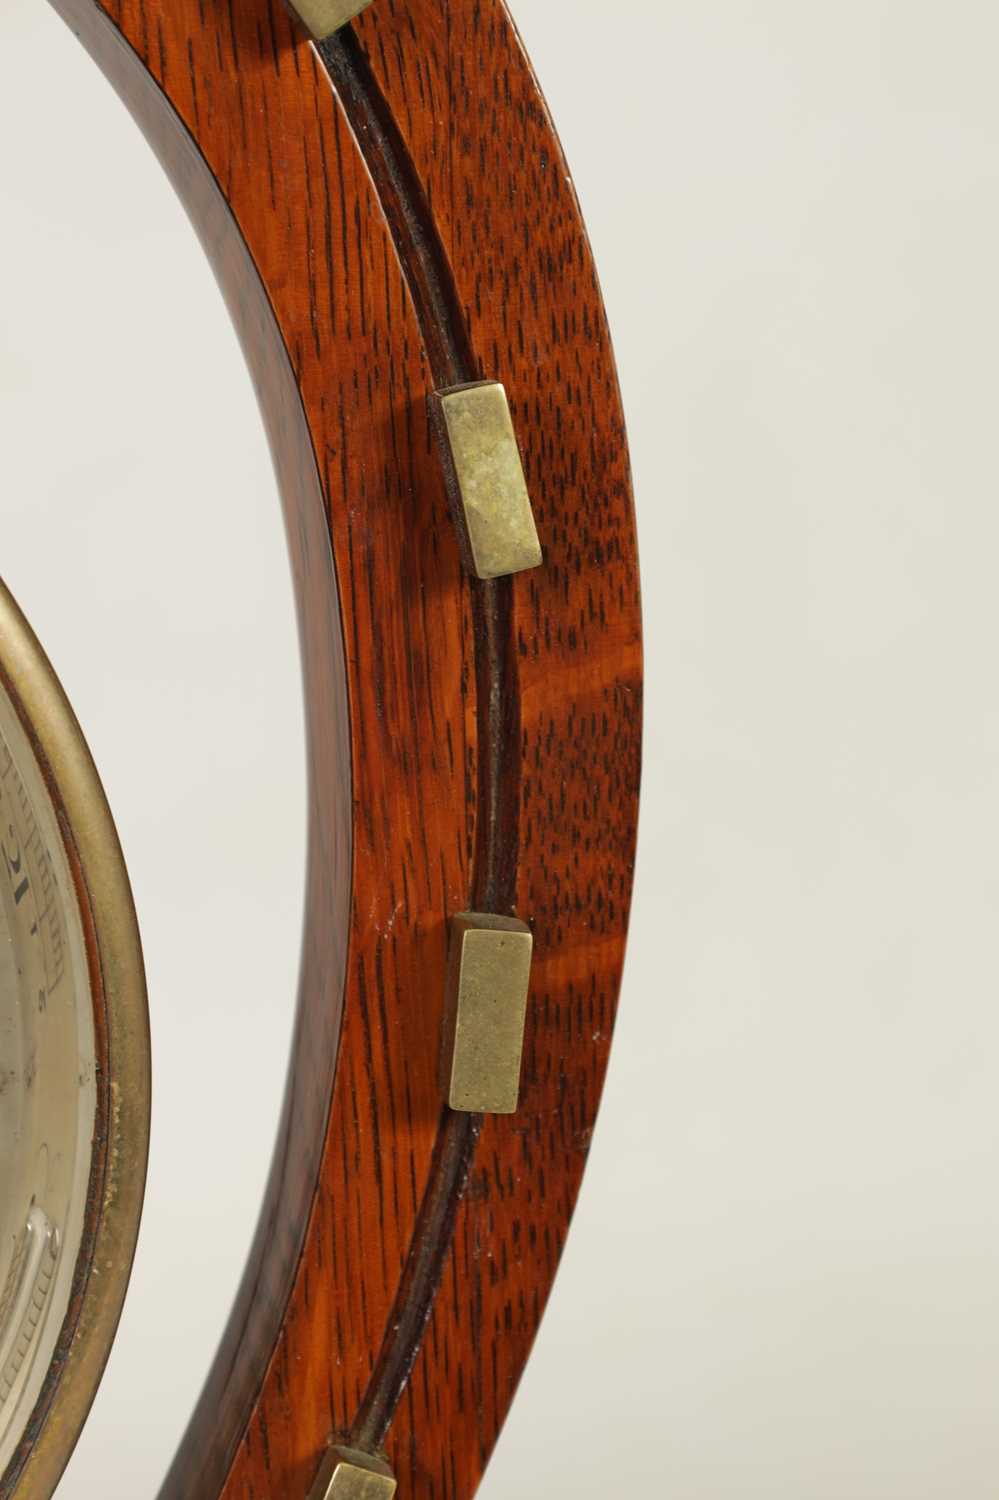 AN UNUSUAL LATE 19TH CENTURY BAROMETER OF EQUESTRIAN INTEREST - Image 6 of 12